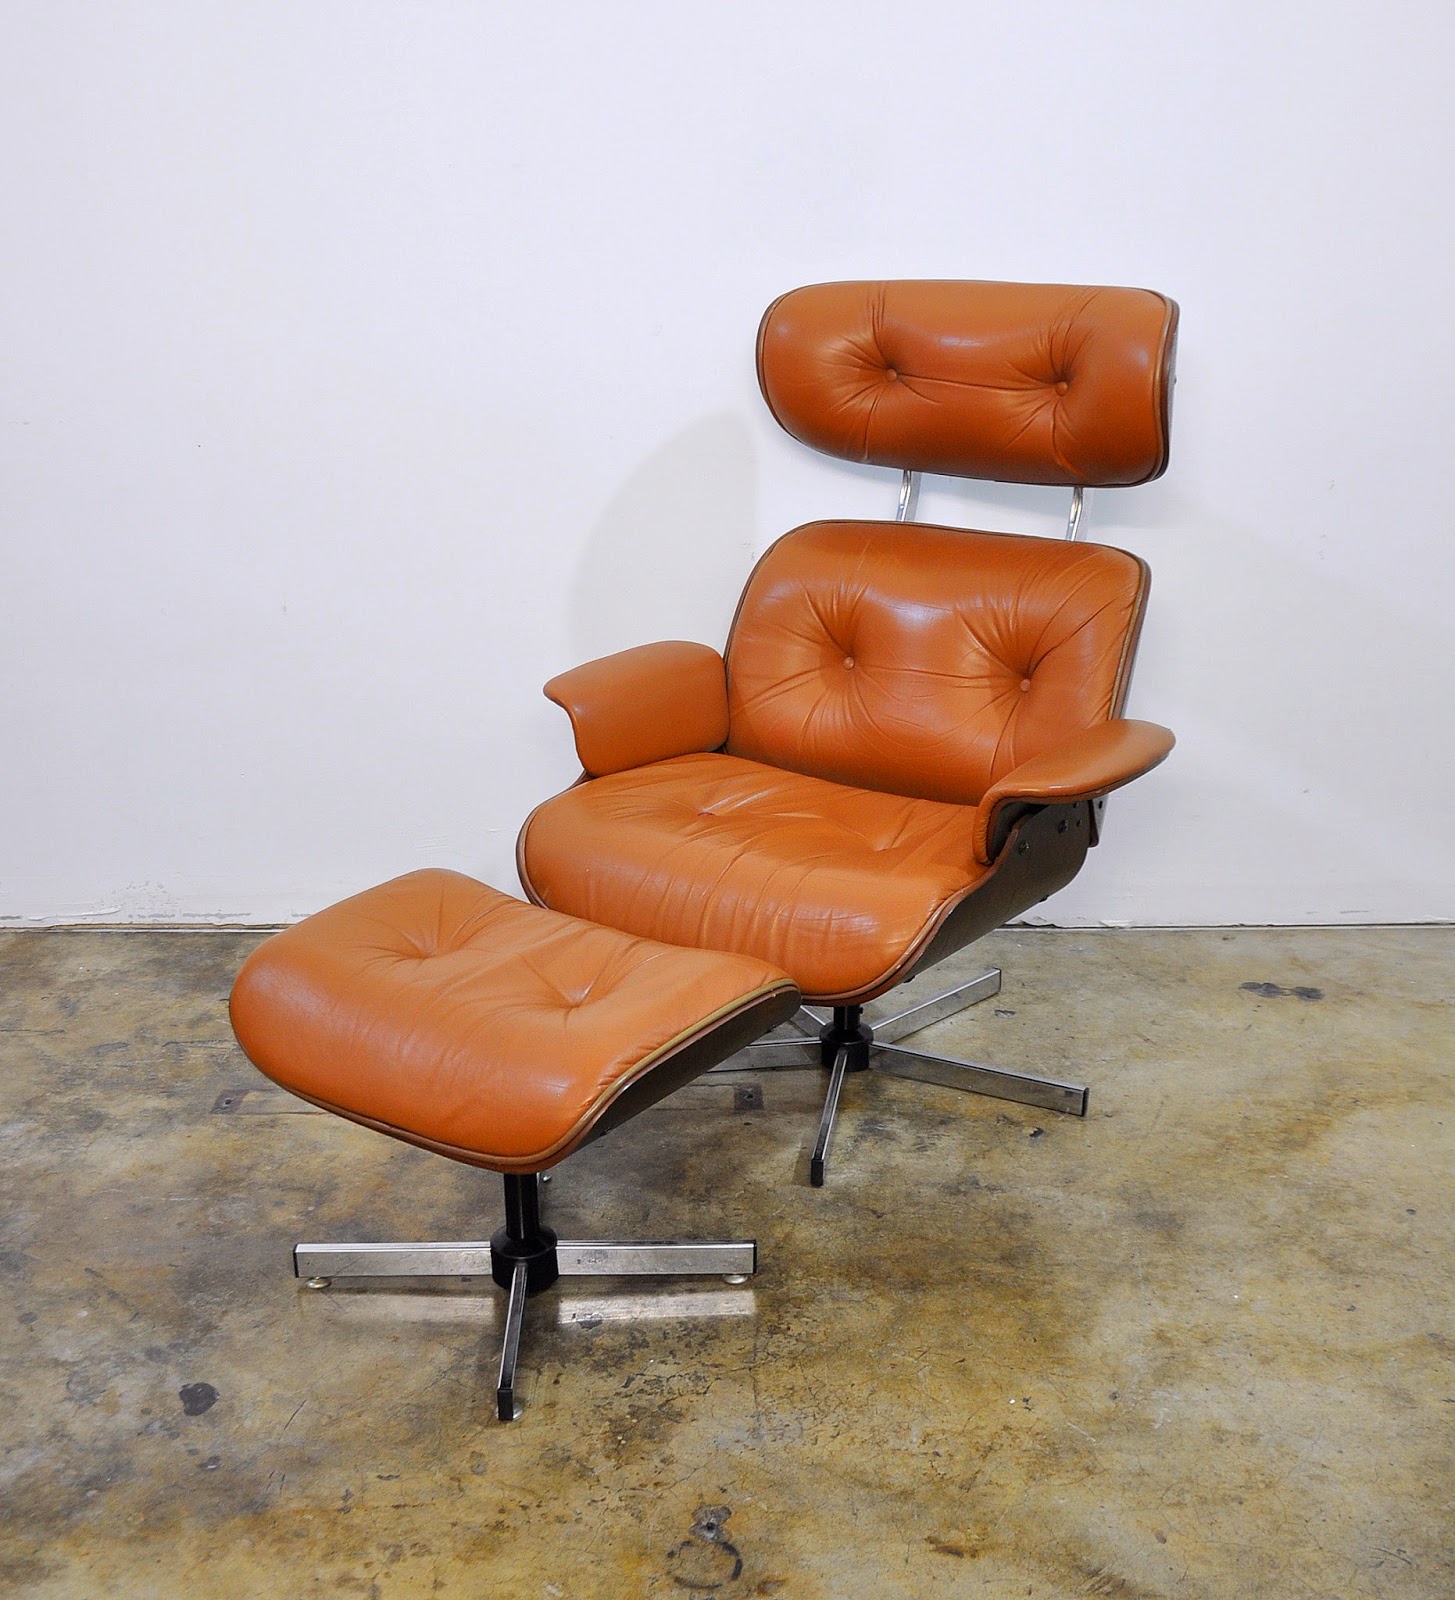  Leather Chair And Footstool Eames for Large Space